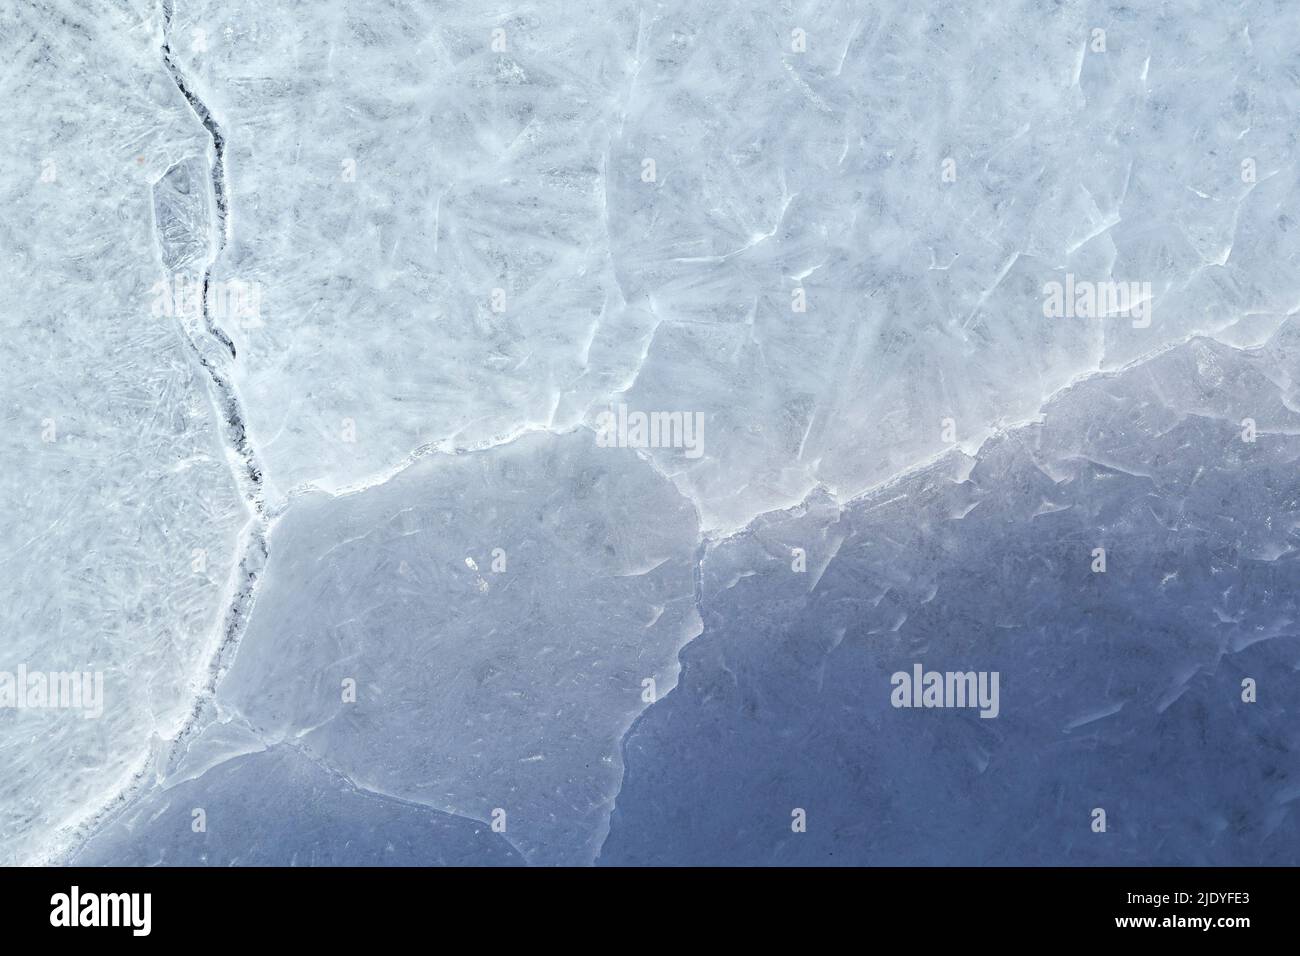 Close-up of cracked ice on a frozen lake in the winter, viewed from above. Abstract textured full frame background. Copy space, top view. Stock Photo